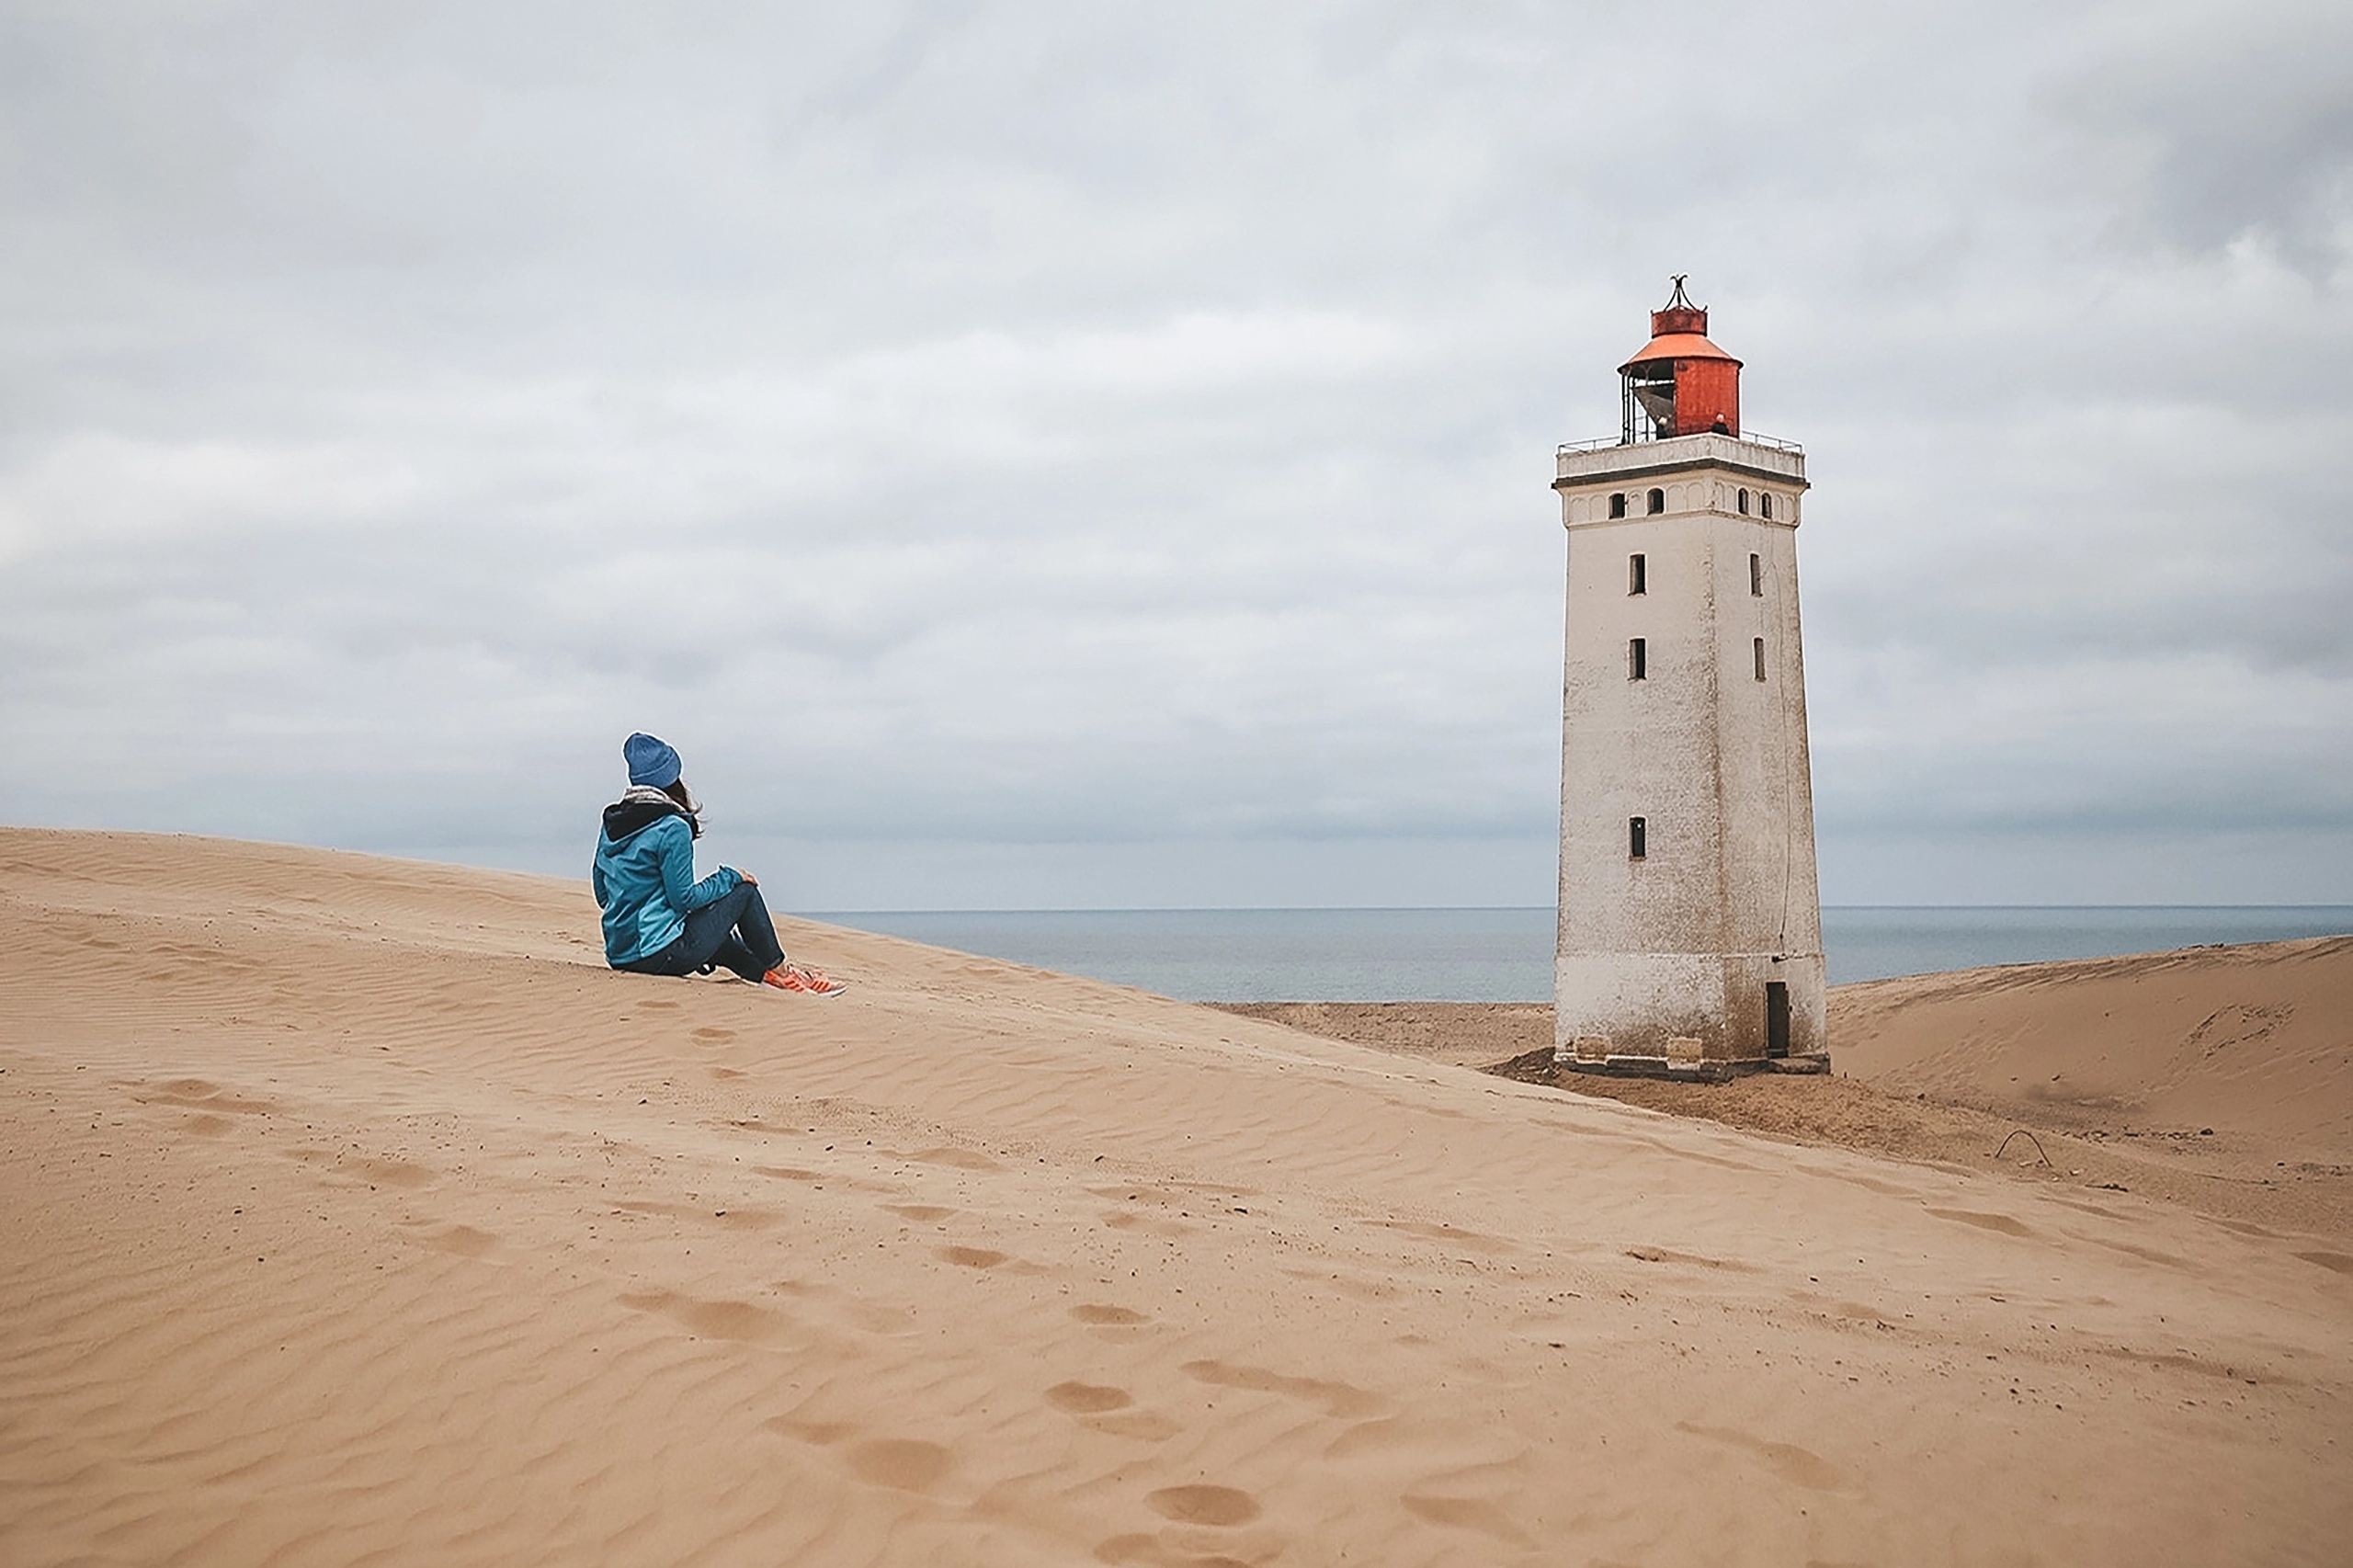 The Rubjerg Knude Lighthouse is not only cool to look at, but also has an exciting history.